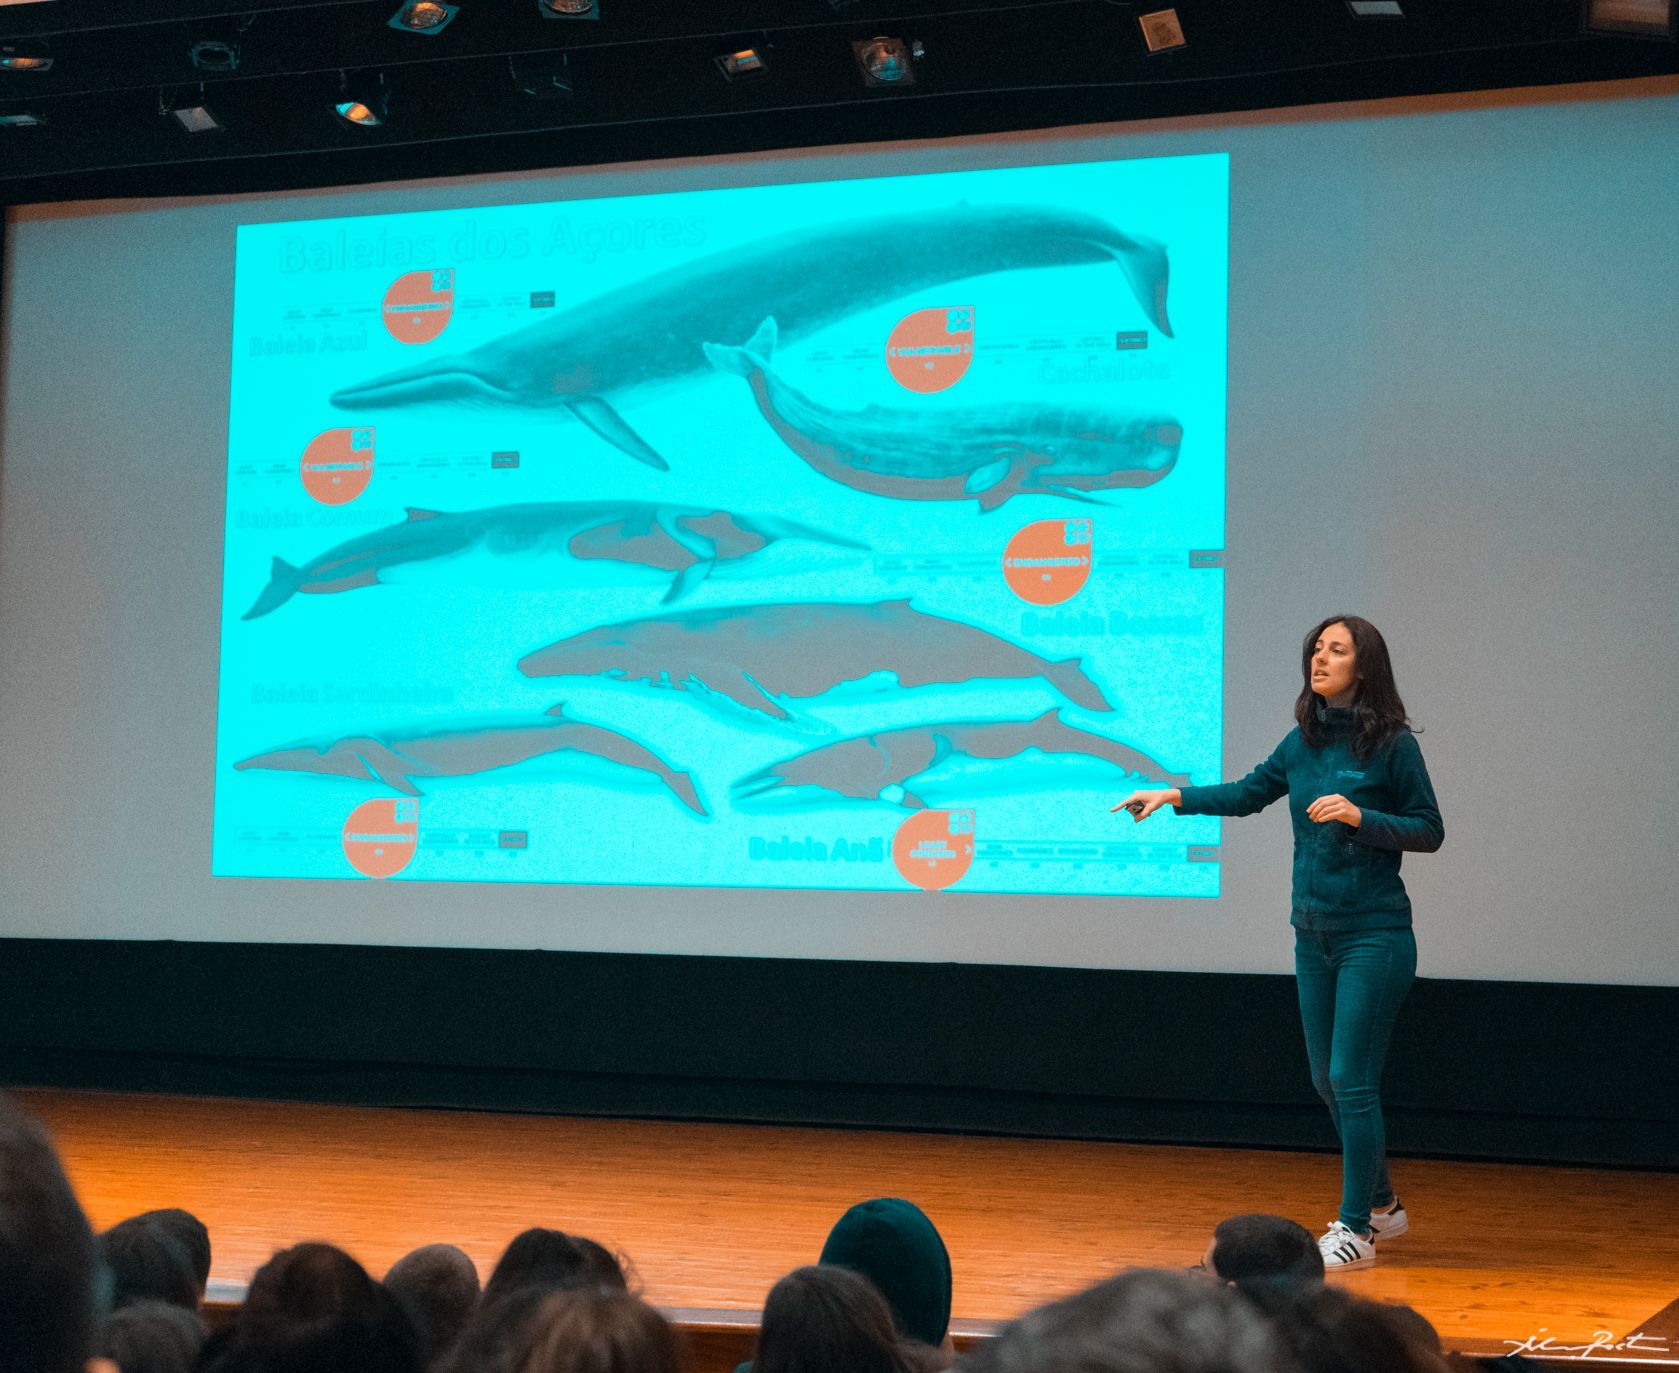 An academic giving a presentation on whales in the Azores.